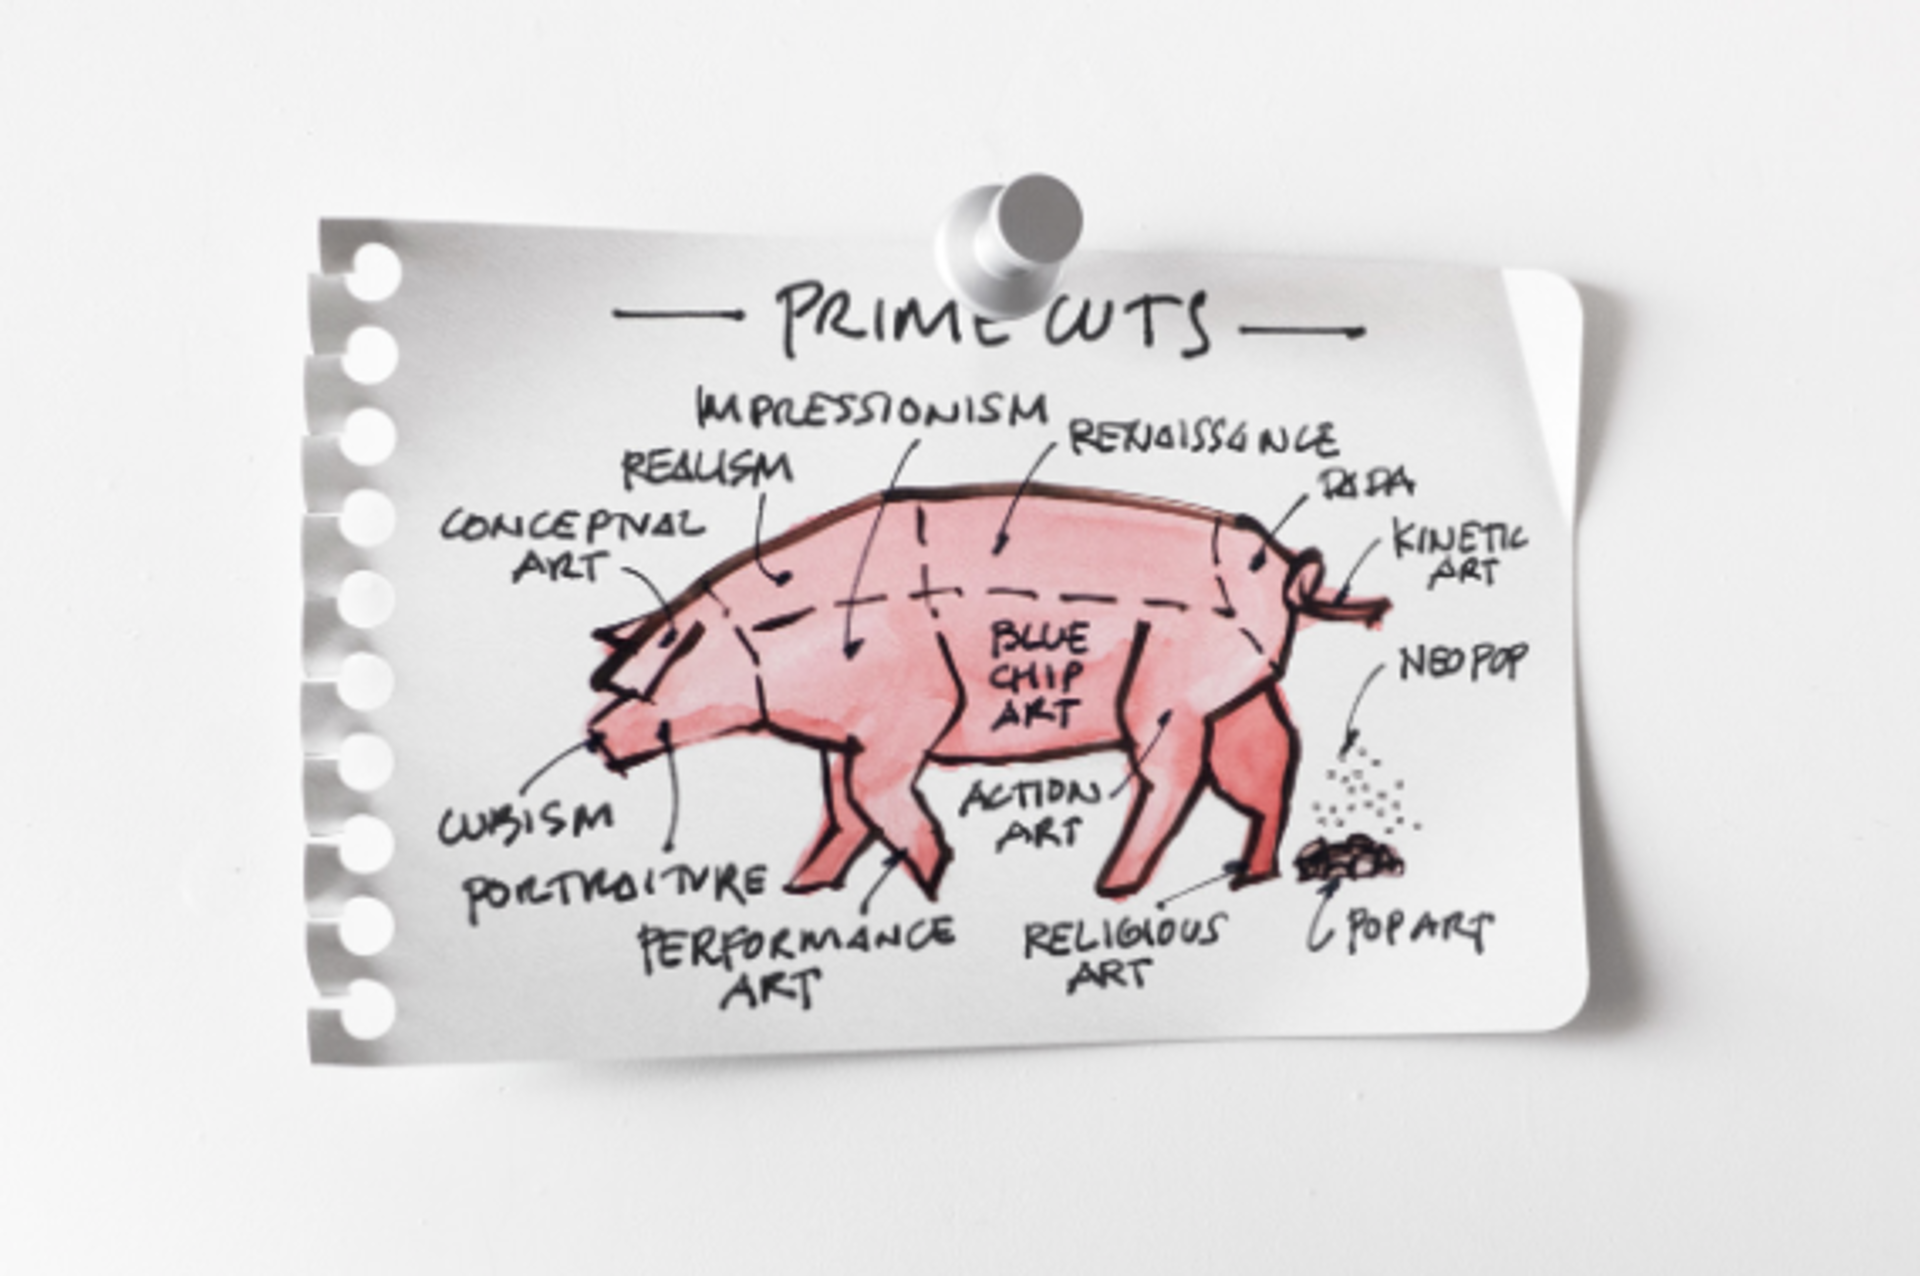 Prime Cuts #2 of 20 by Miles Jaffe